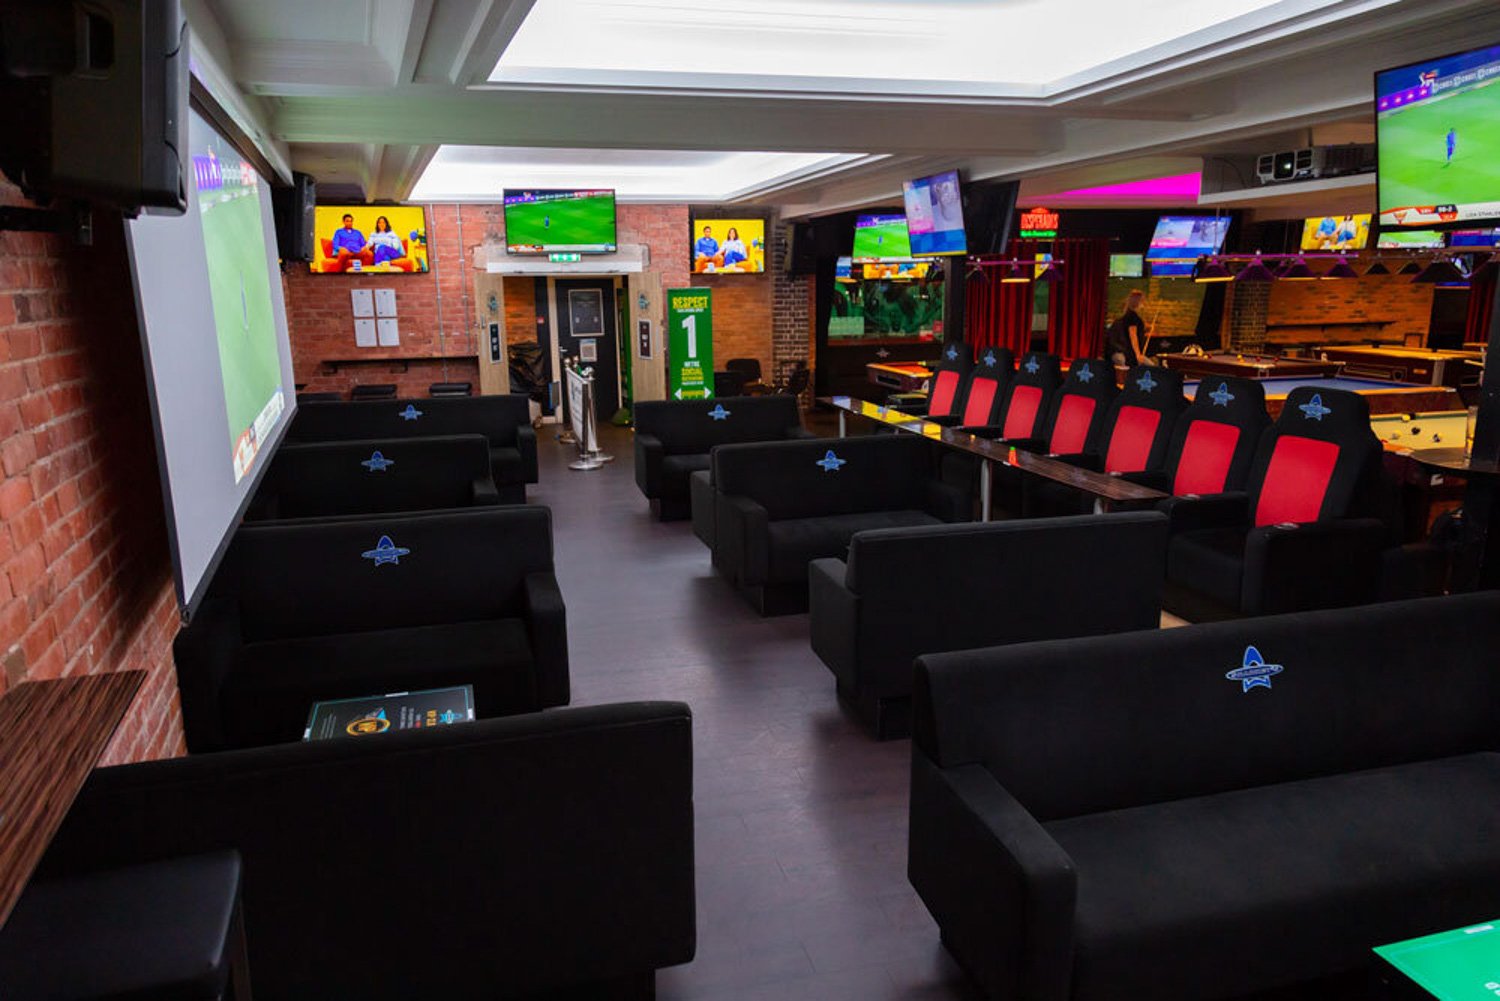 Sharkeys_Sports_Bar_Bournemouth_Live_Sports_Poole_Snooker_Table_Tennis_VIP_Rooms_Consoles-29.jpg